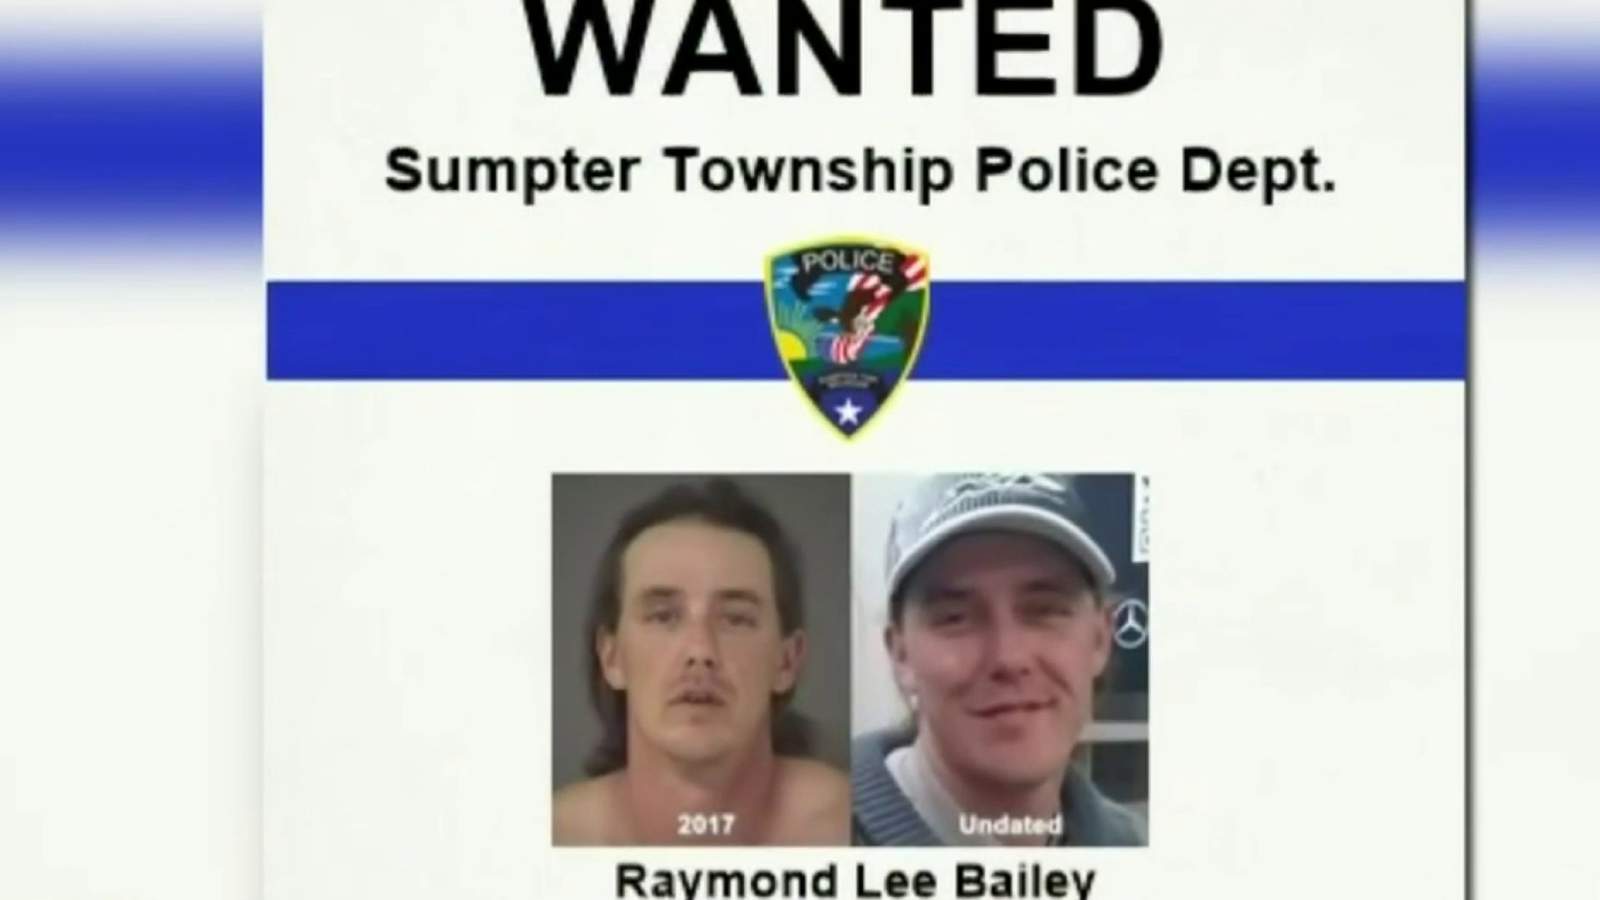 Statewide manhunt for suspect in quadruple murder in Sumpter Township